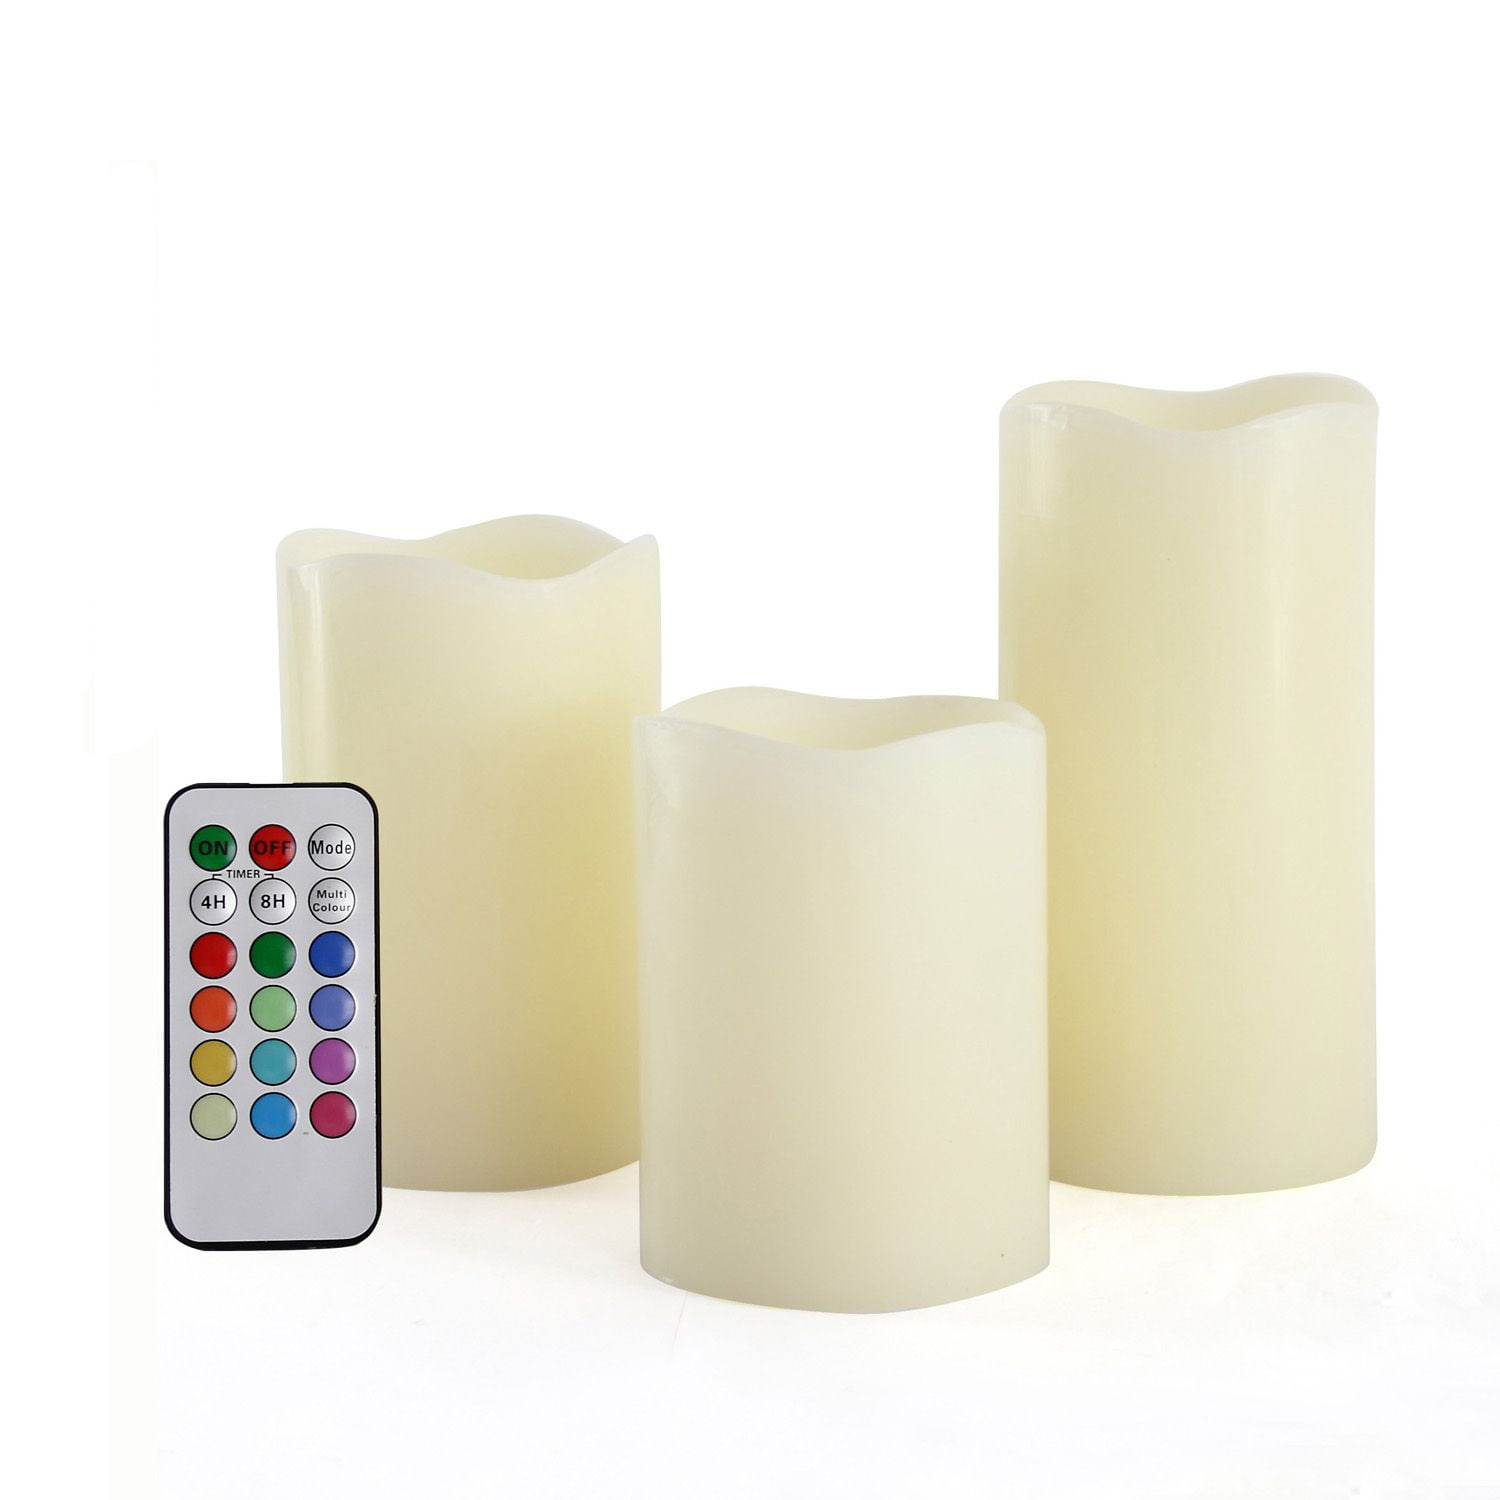 Colour Changing LED Vanilla Scented Flameless Wax Mood Candles with Remote Control Pack of 3